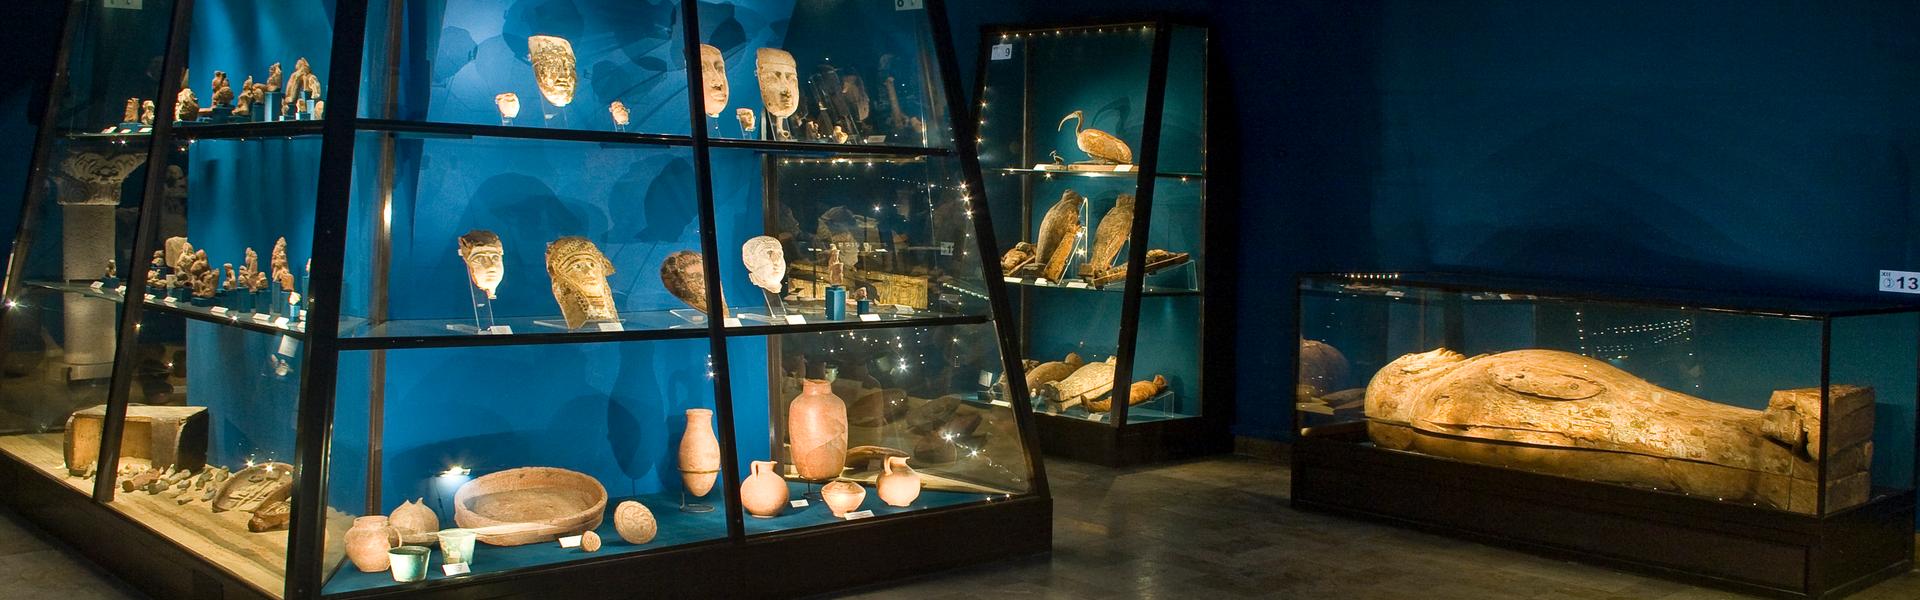 Illuminated display cases with Egyptian exhibits.